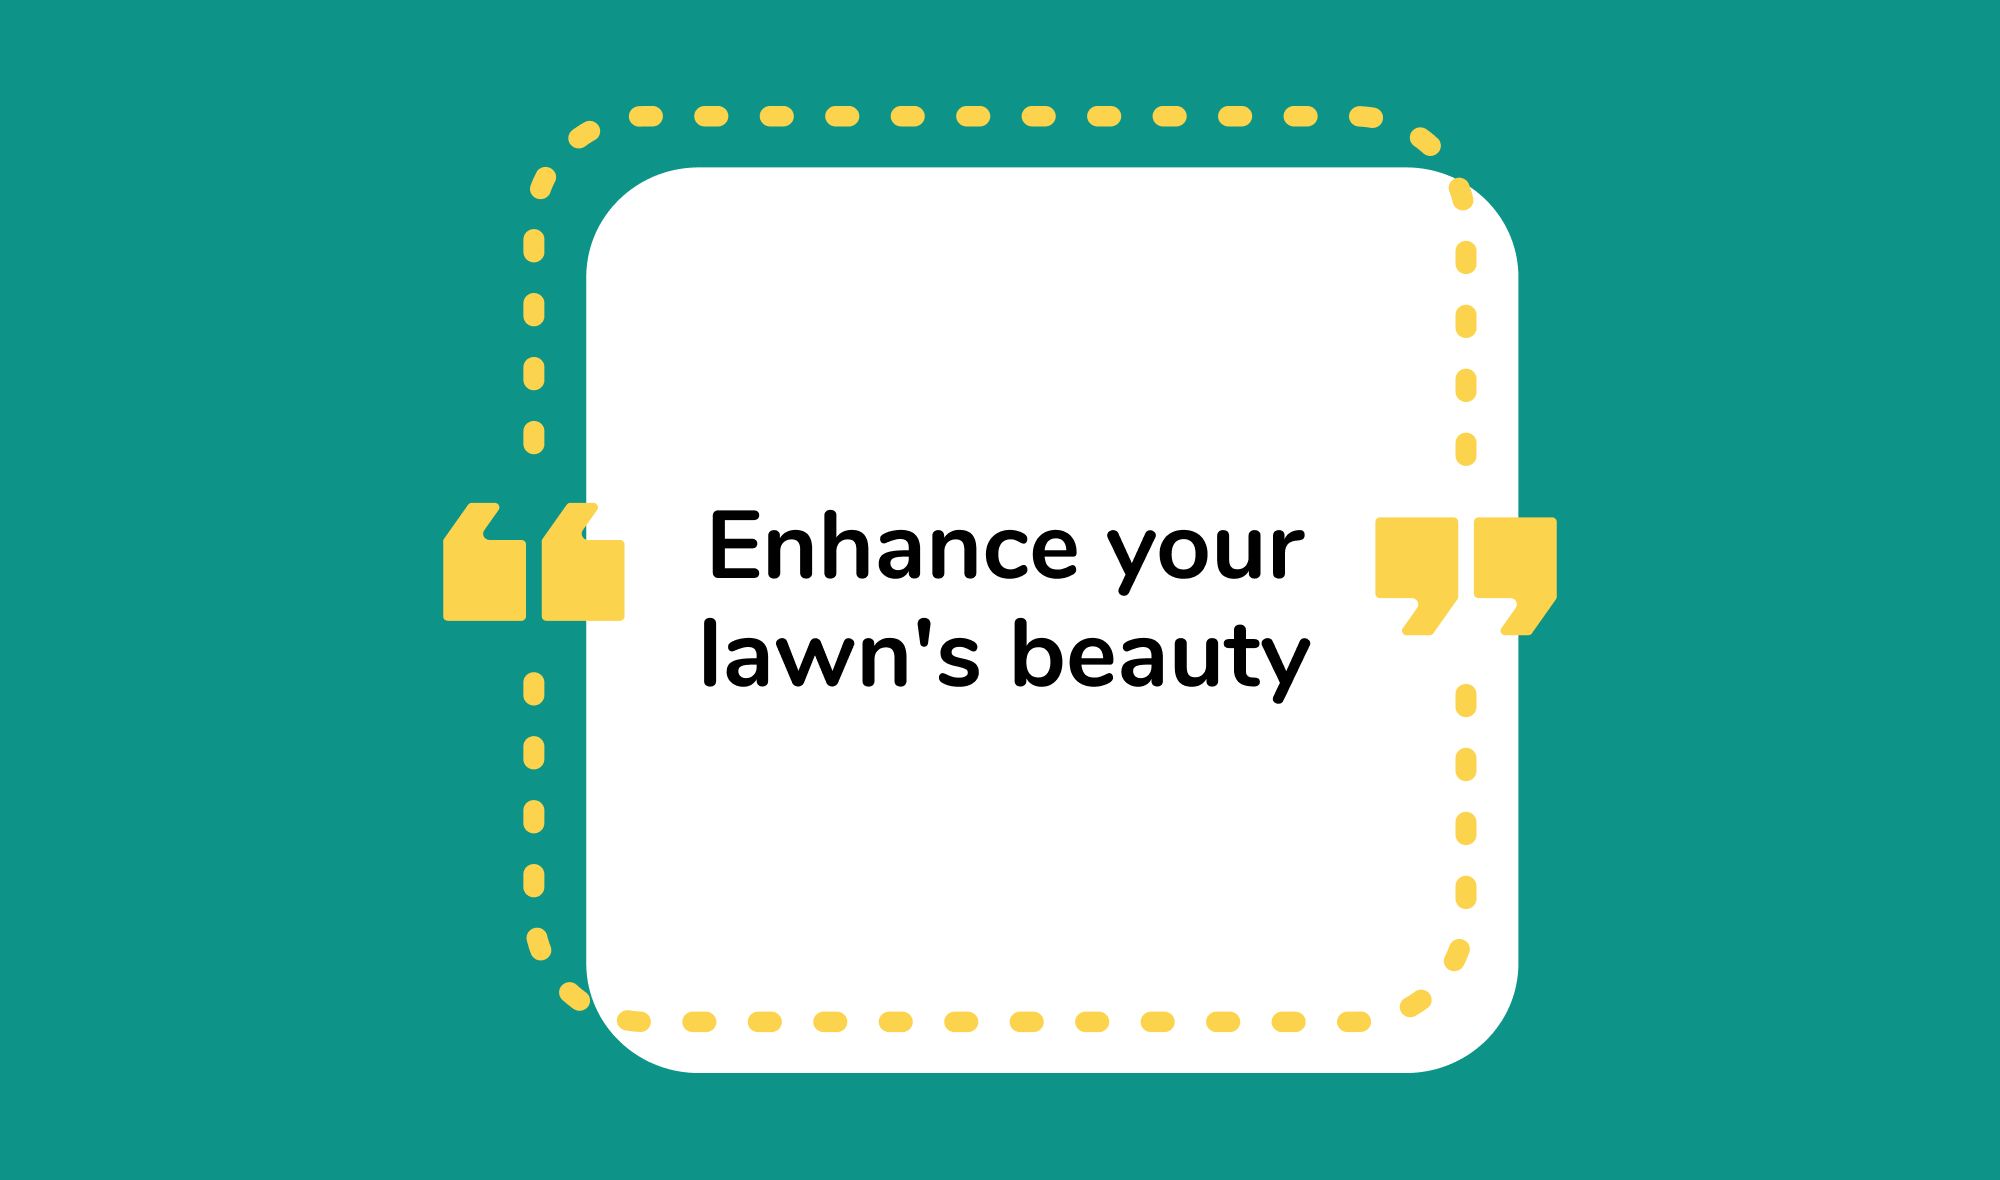 #18 Enhance your lawn's beauty: plant native flowers and shrubs in Rochester